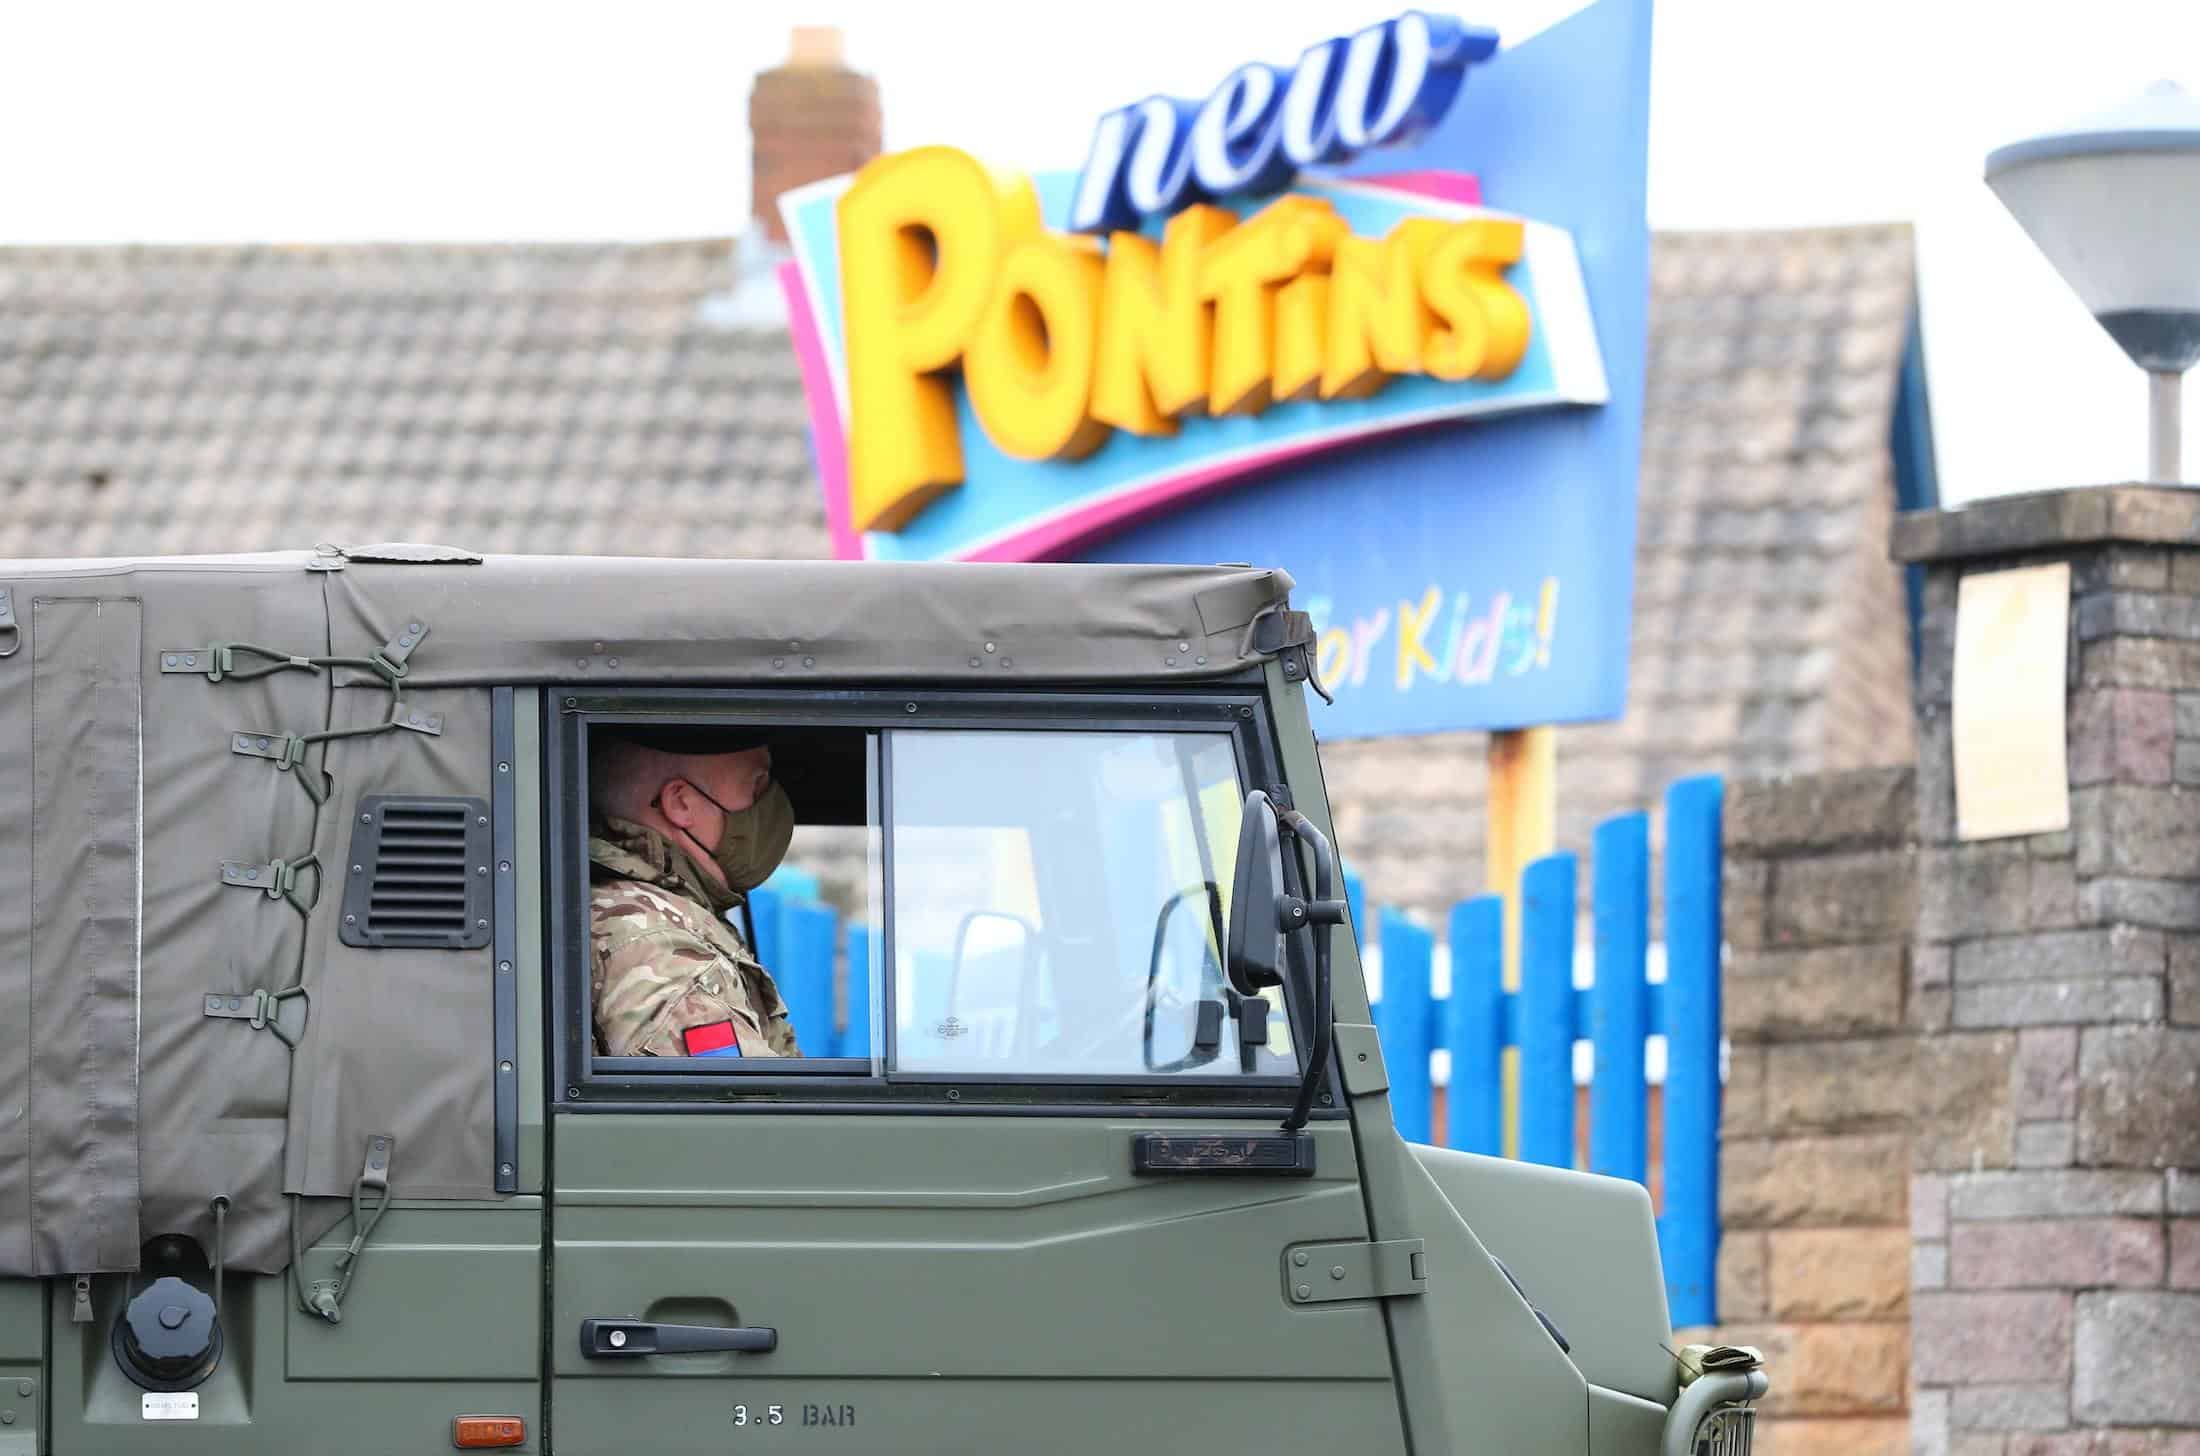 Soldiers arrive at Pontins holiday park ahead of Liverpool mass testing